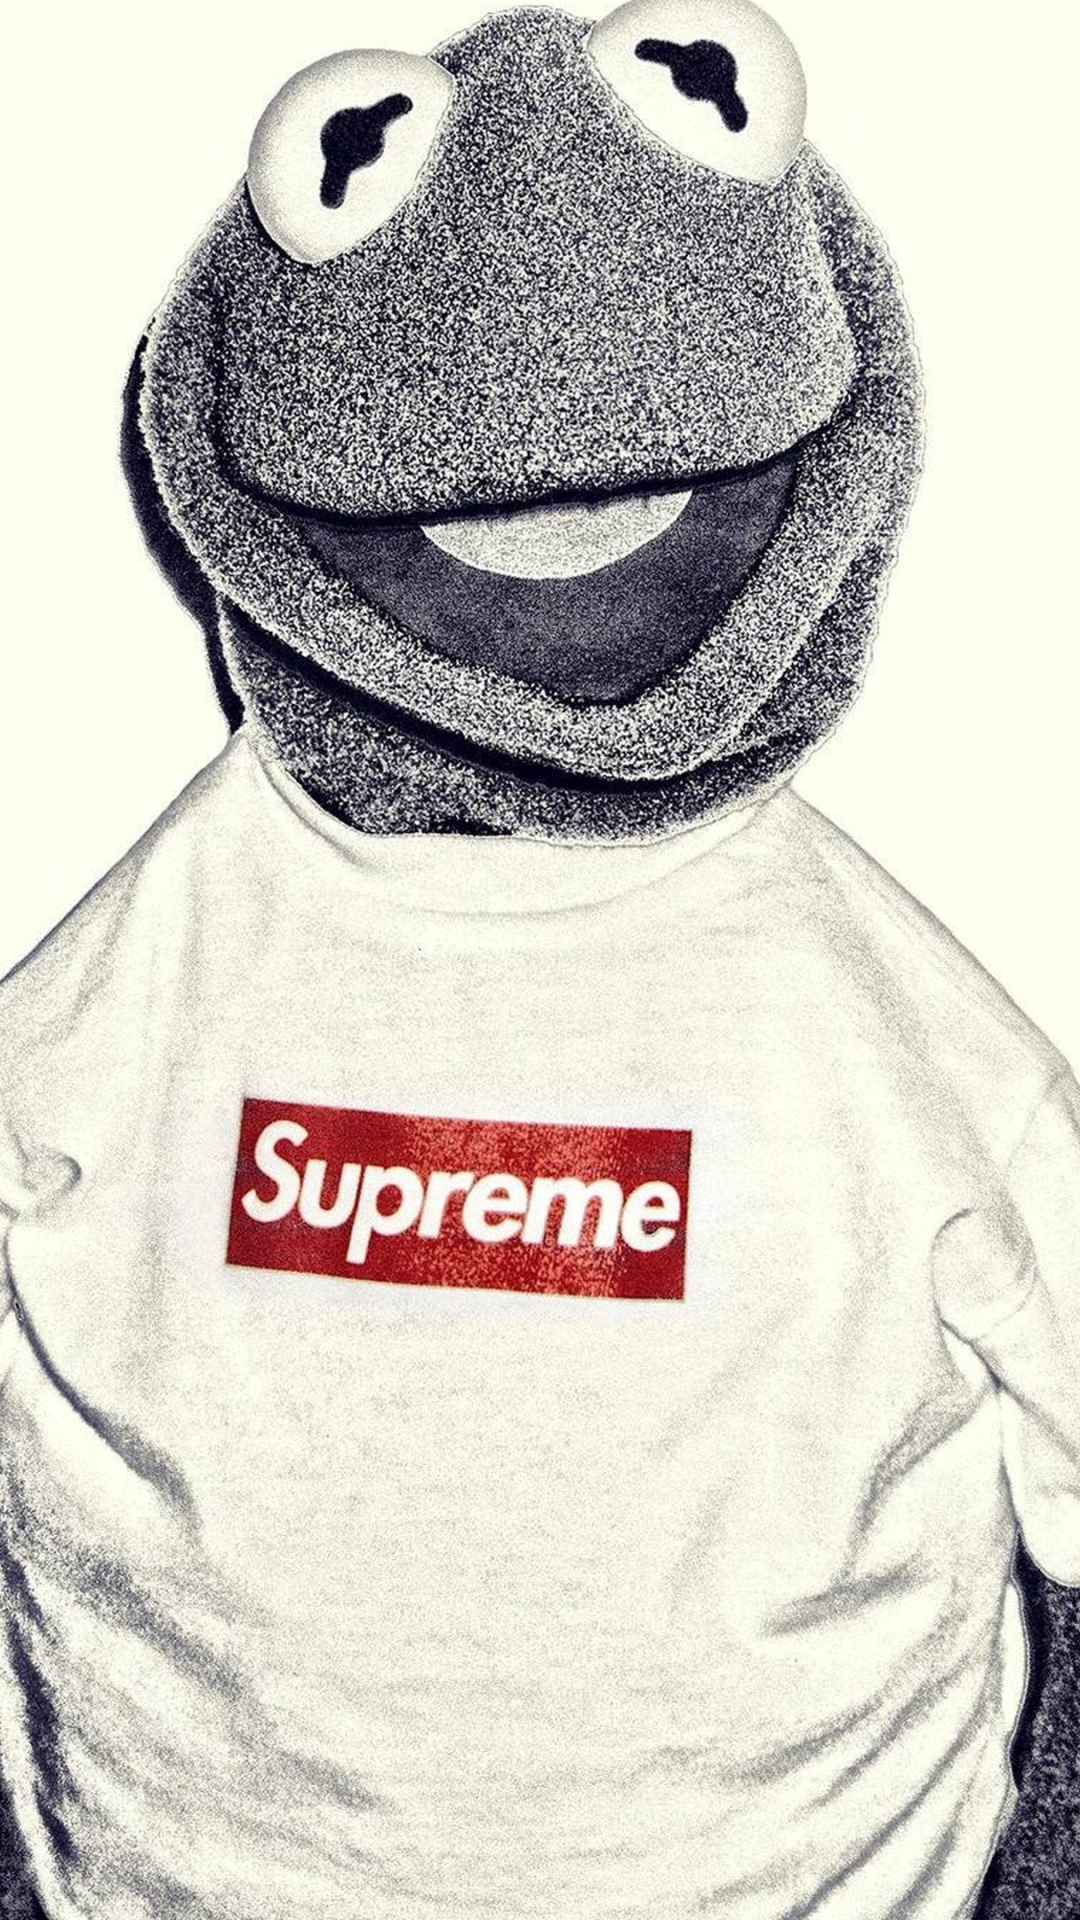 Kermit The Frog, Supreme, Outerwear, Brand, t Shirt. Wallpaper in 1080x1920 Resolution